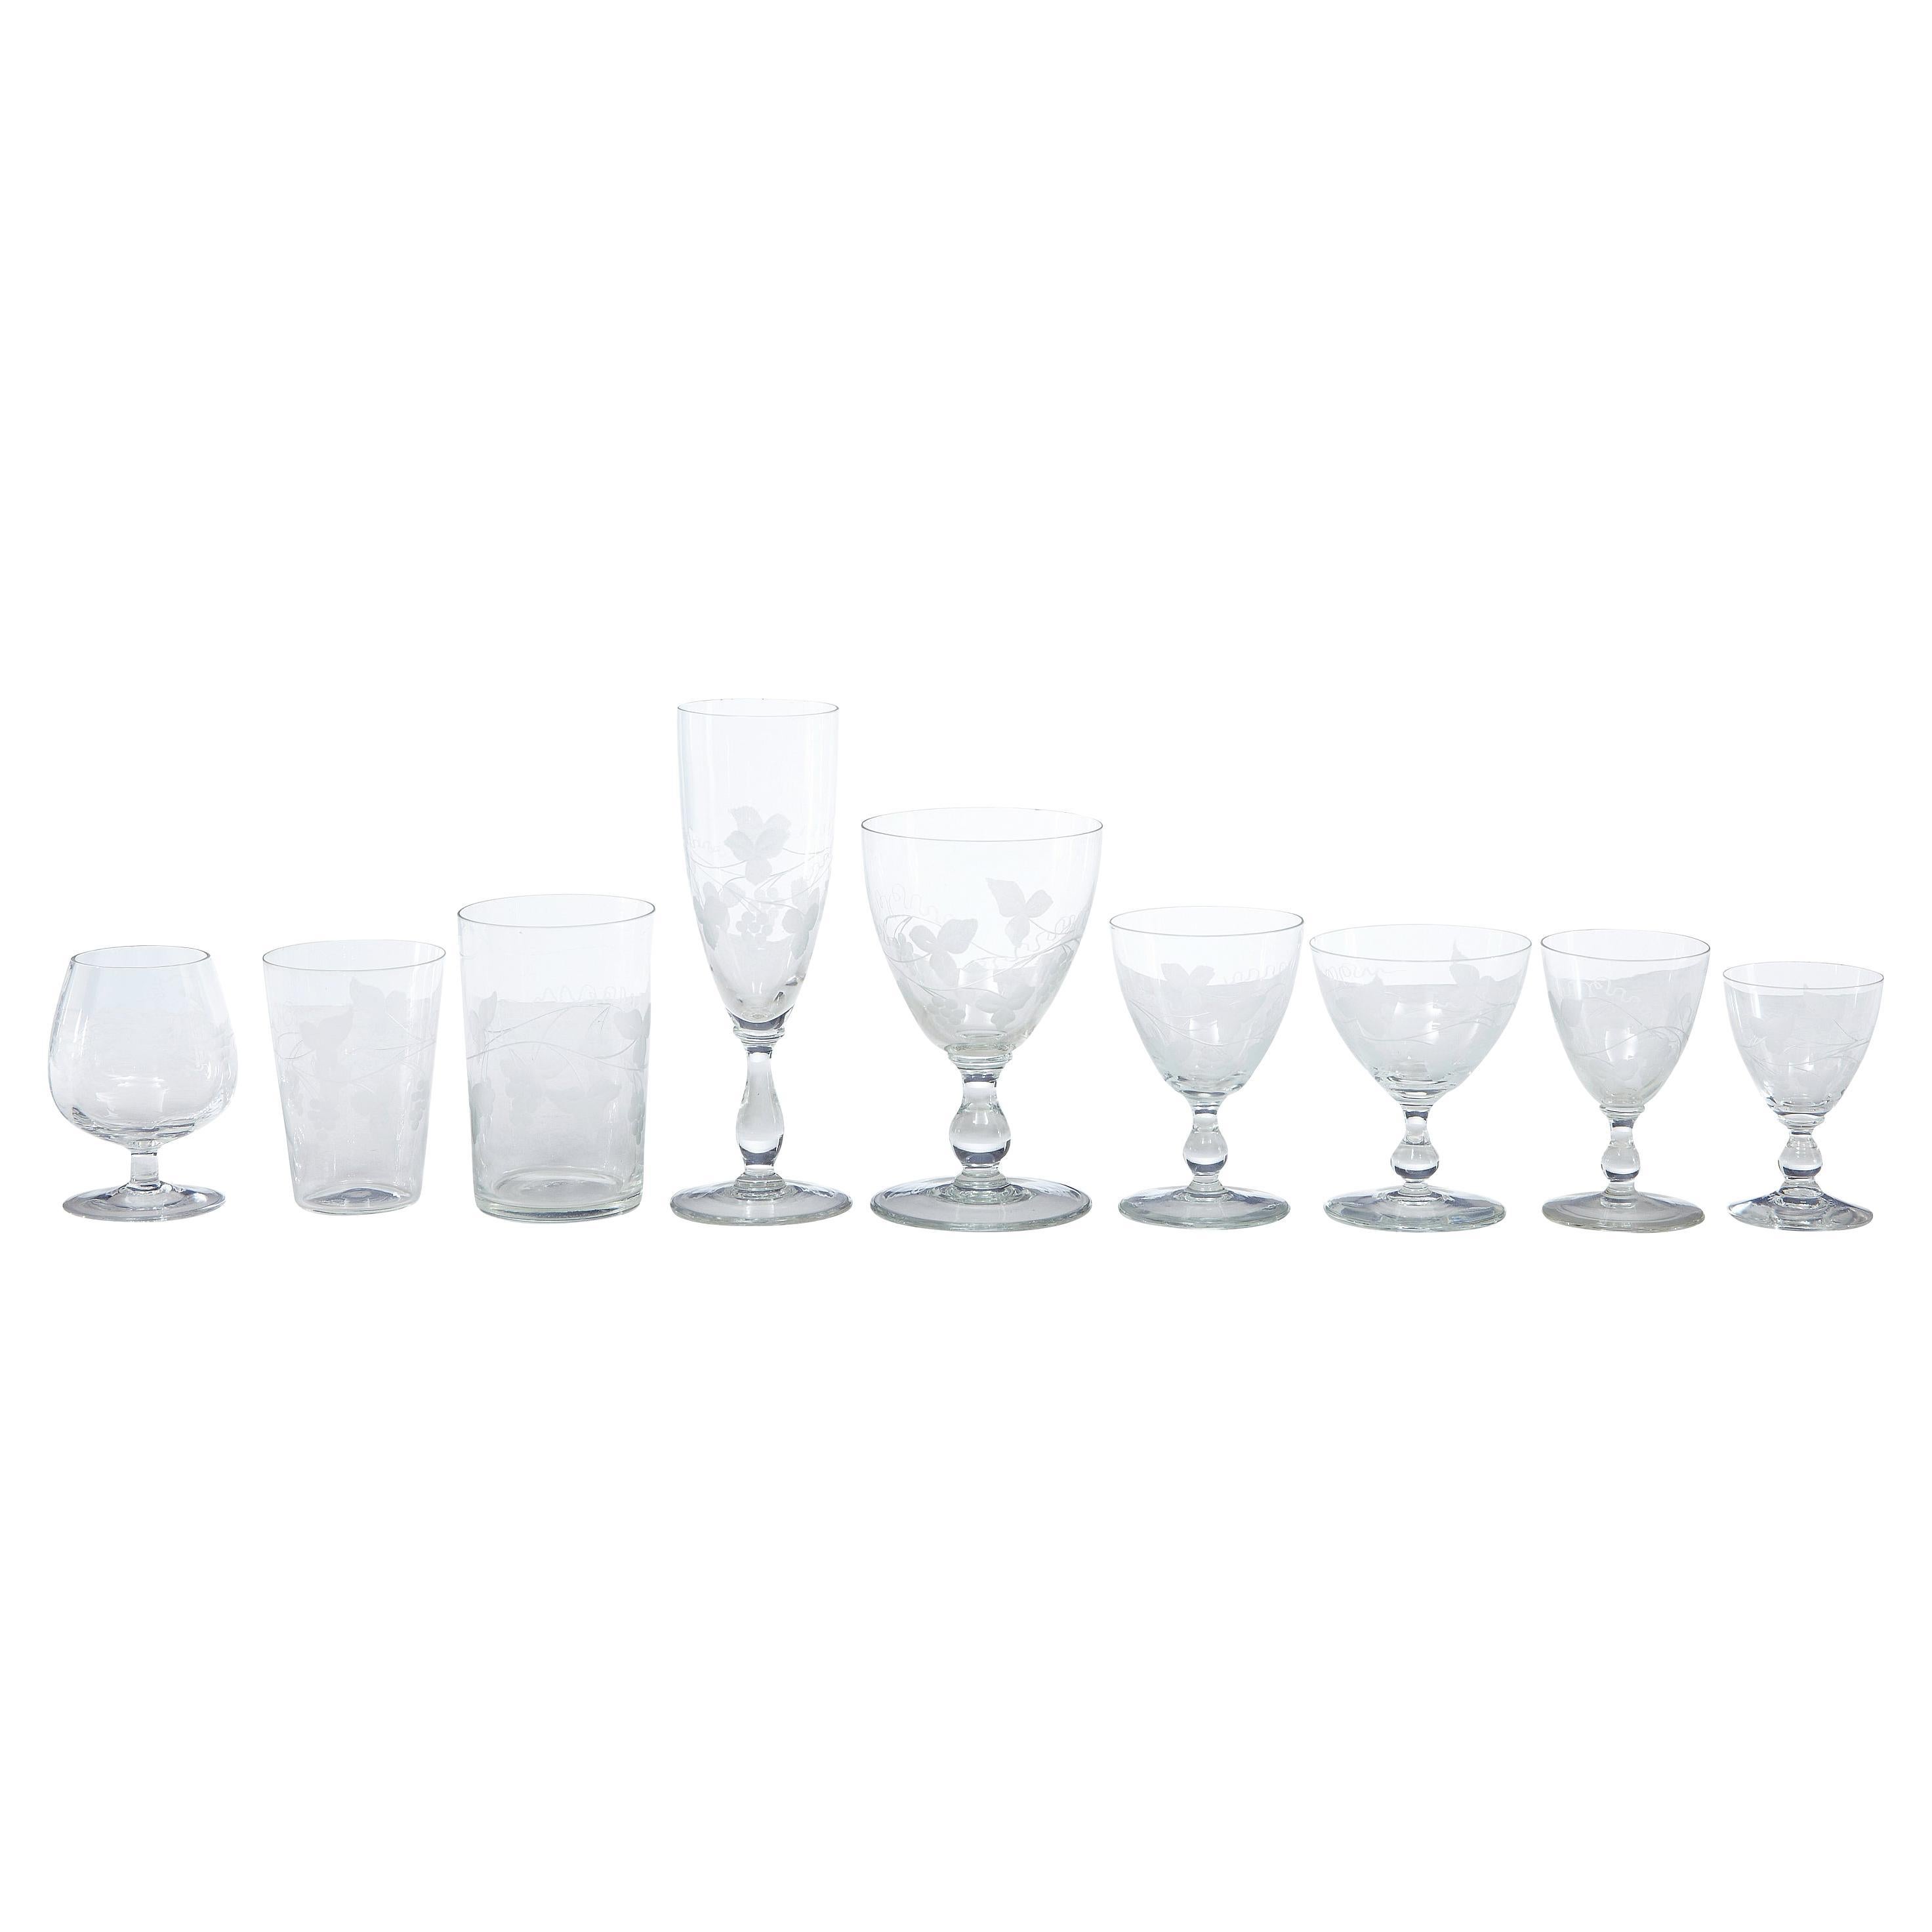 A fine collection of 1930’s Riihimaki savoy vine etched glasses For Sale